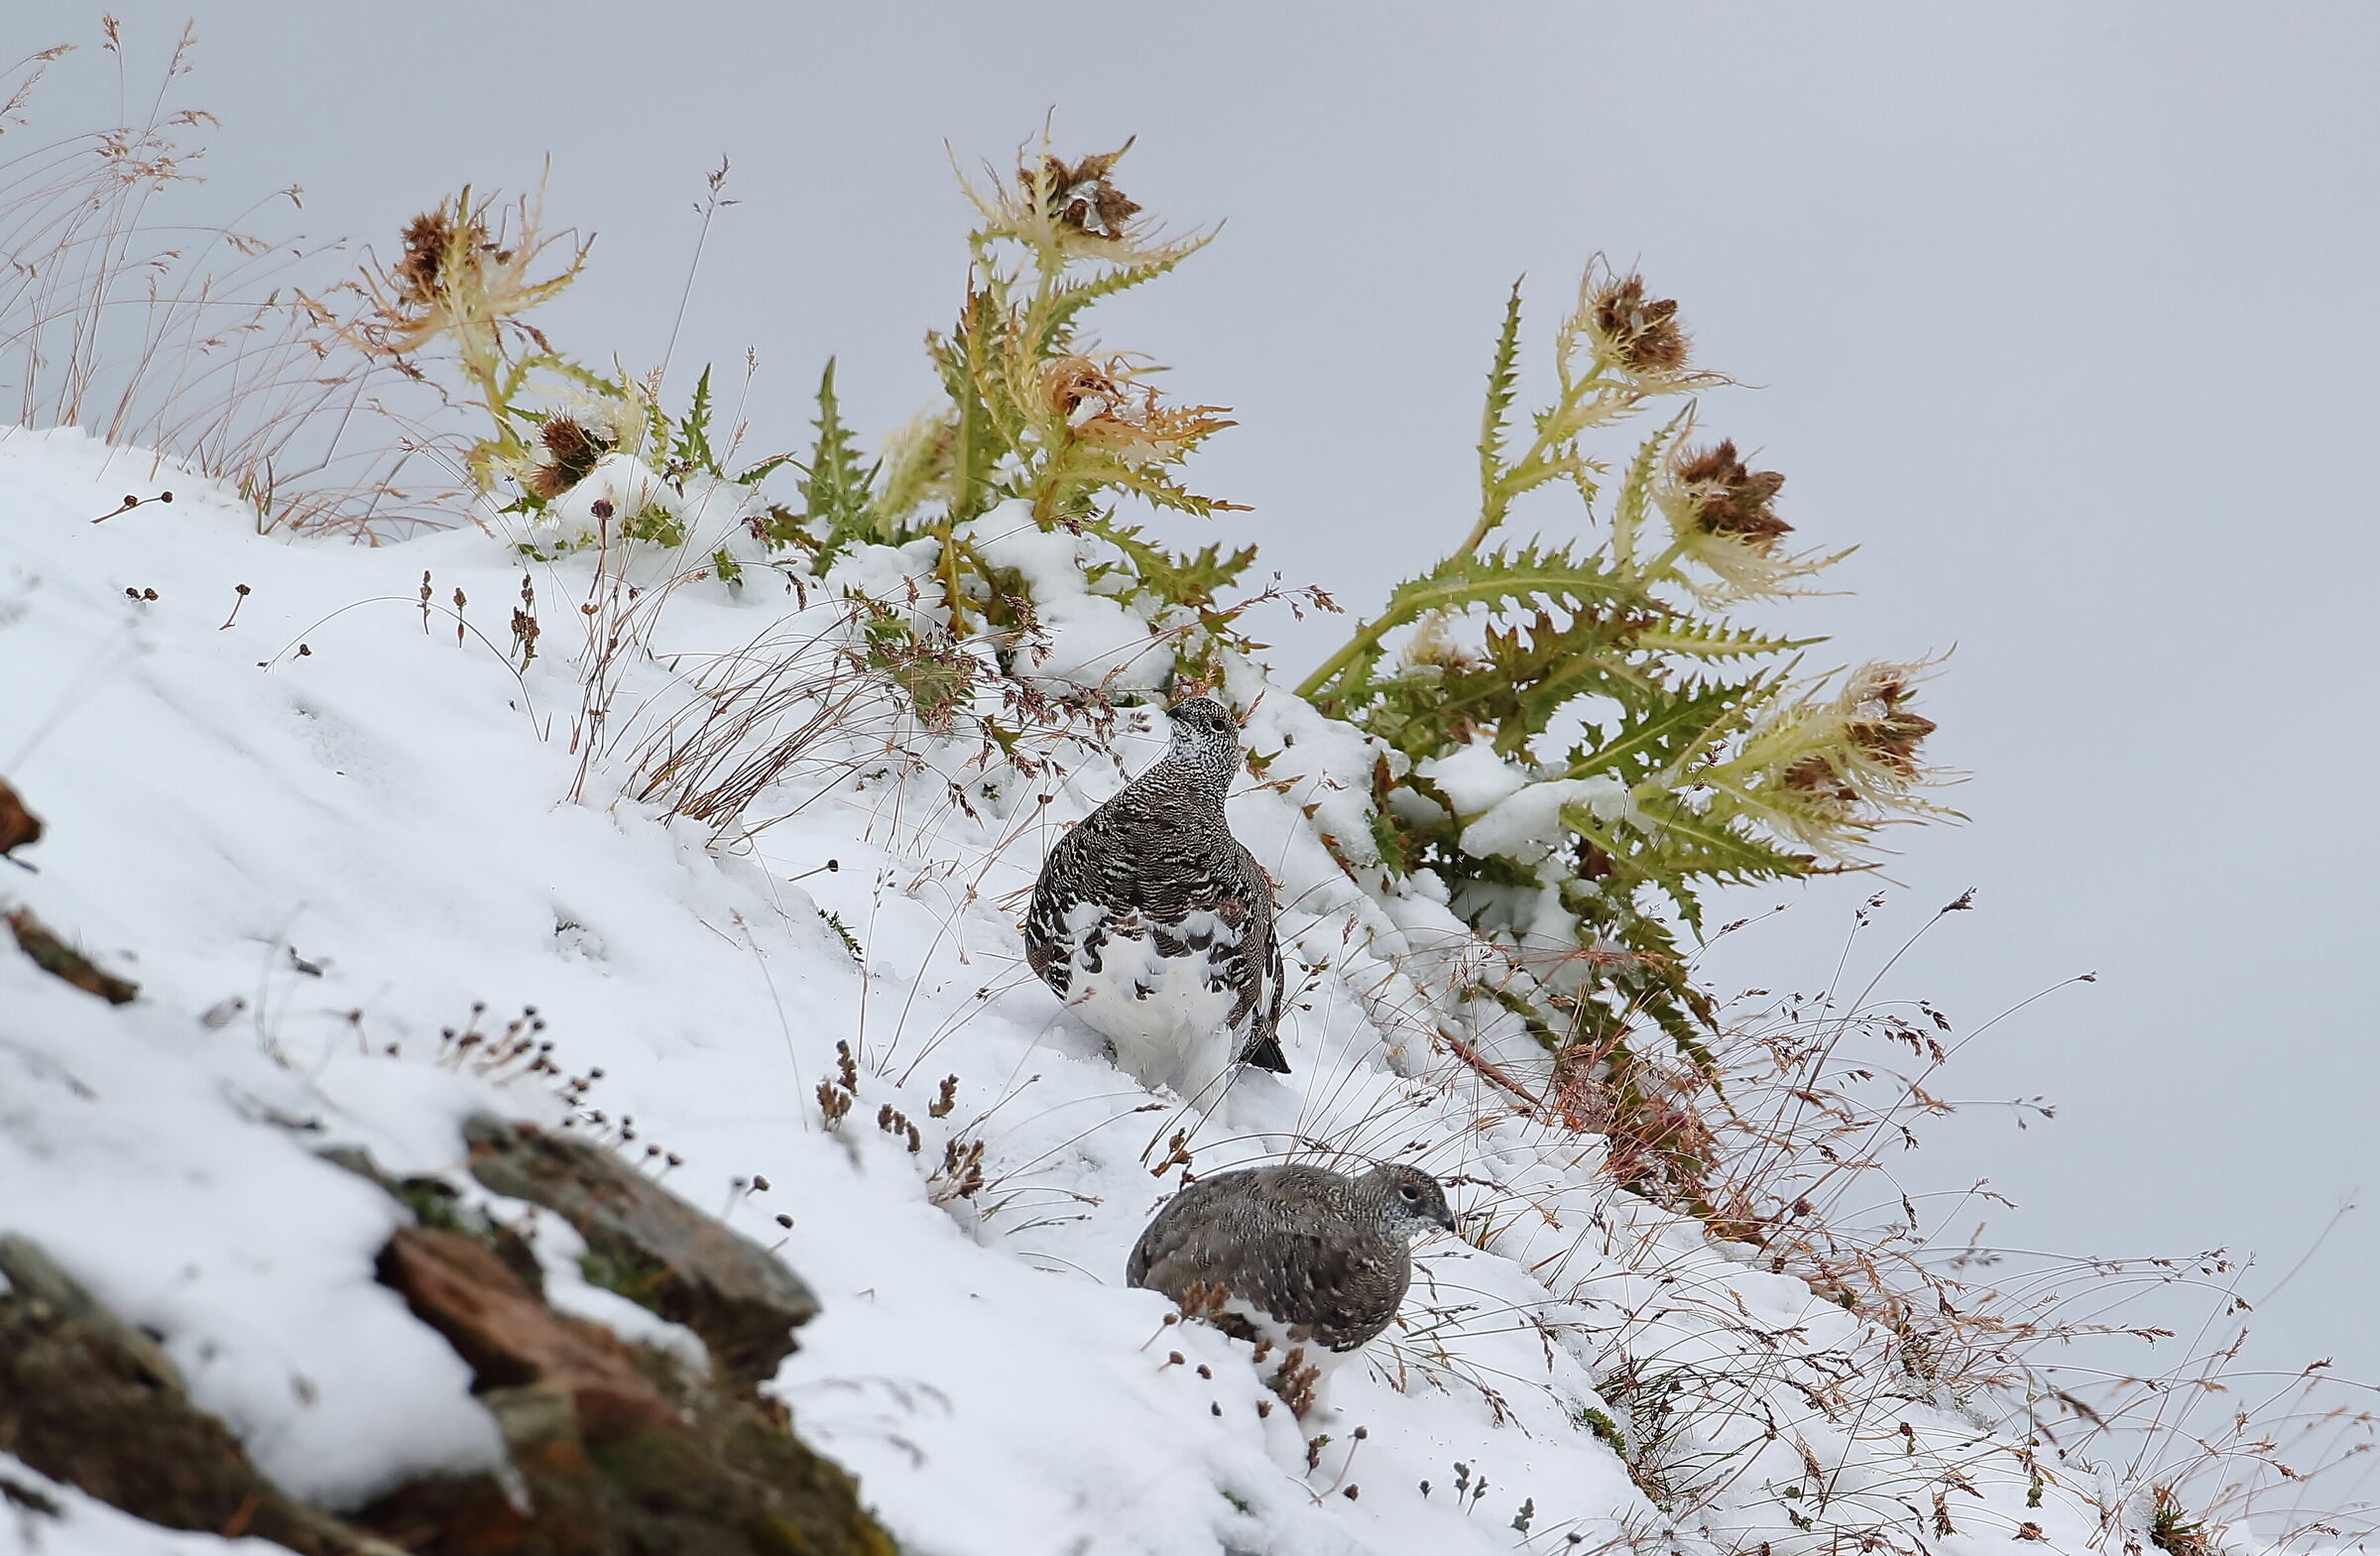 On the first snow between the thistles...